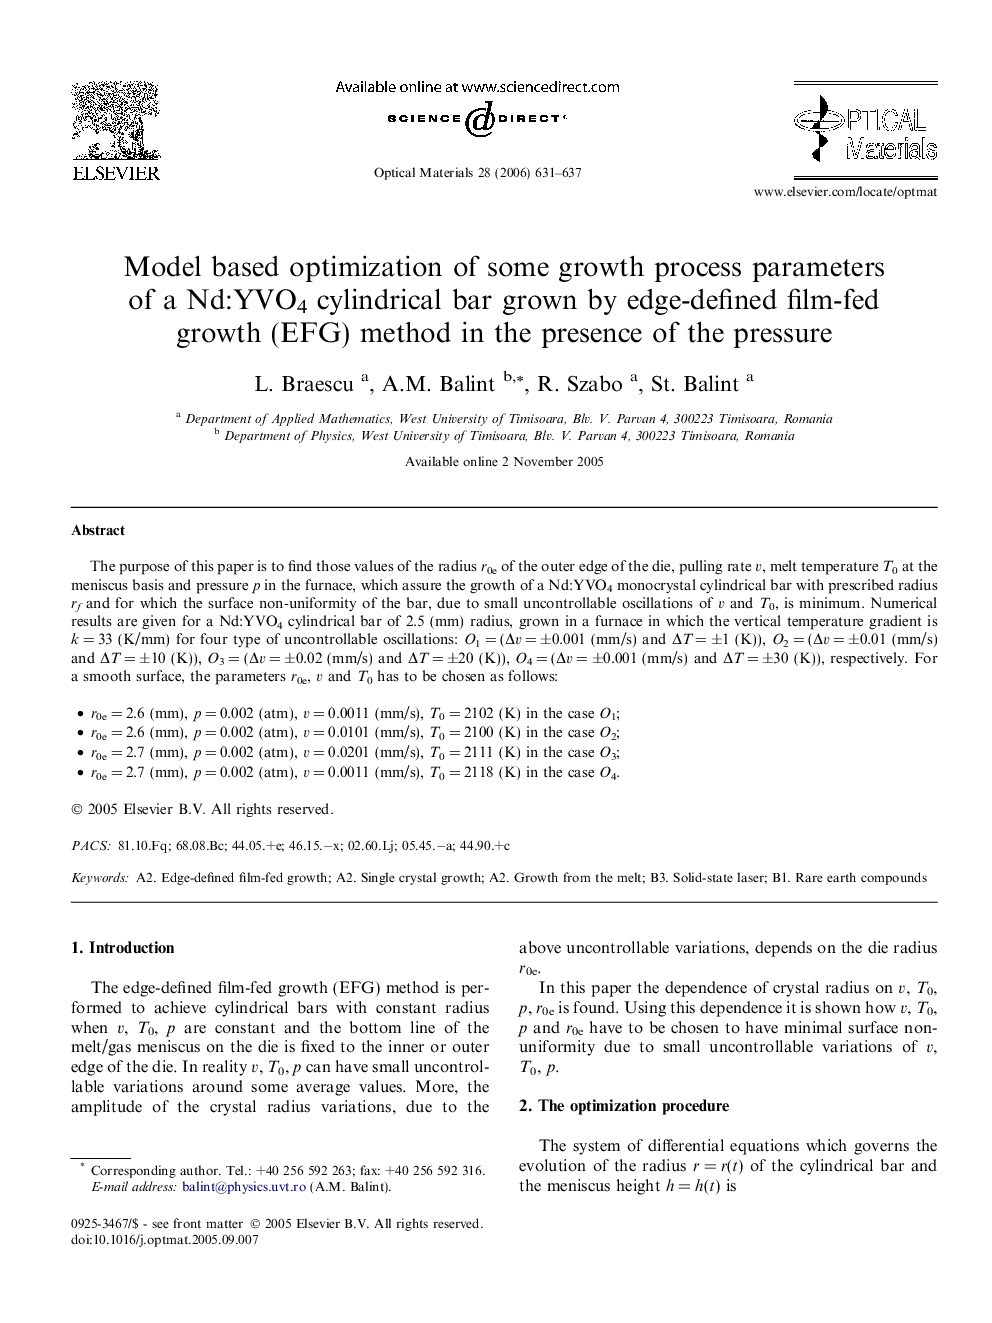 Model based optimization of some growth process parameters of a Nd:YVO4 cylindrical bar grown by edge-defined film-fed growth (EFG) method in the presence of the pressure